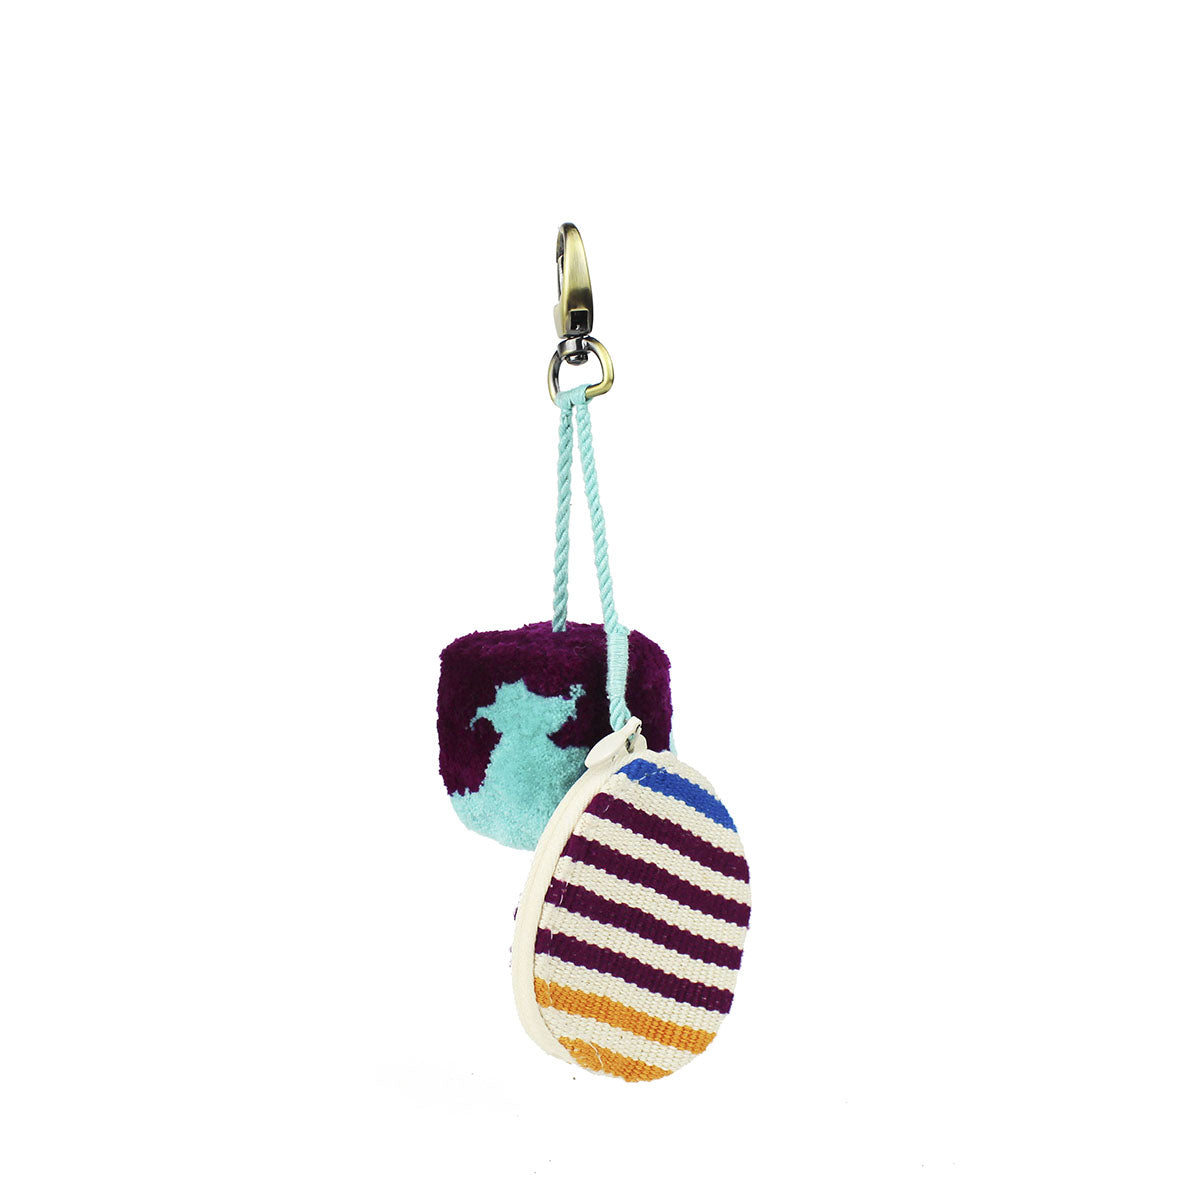 Artisan Handwoven Mercado Key Chain in Moras style. Attached to the clip is a deep purple and mint green pompom and a mini zippered case with yellow, purple, and blue stripes.